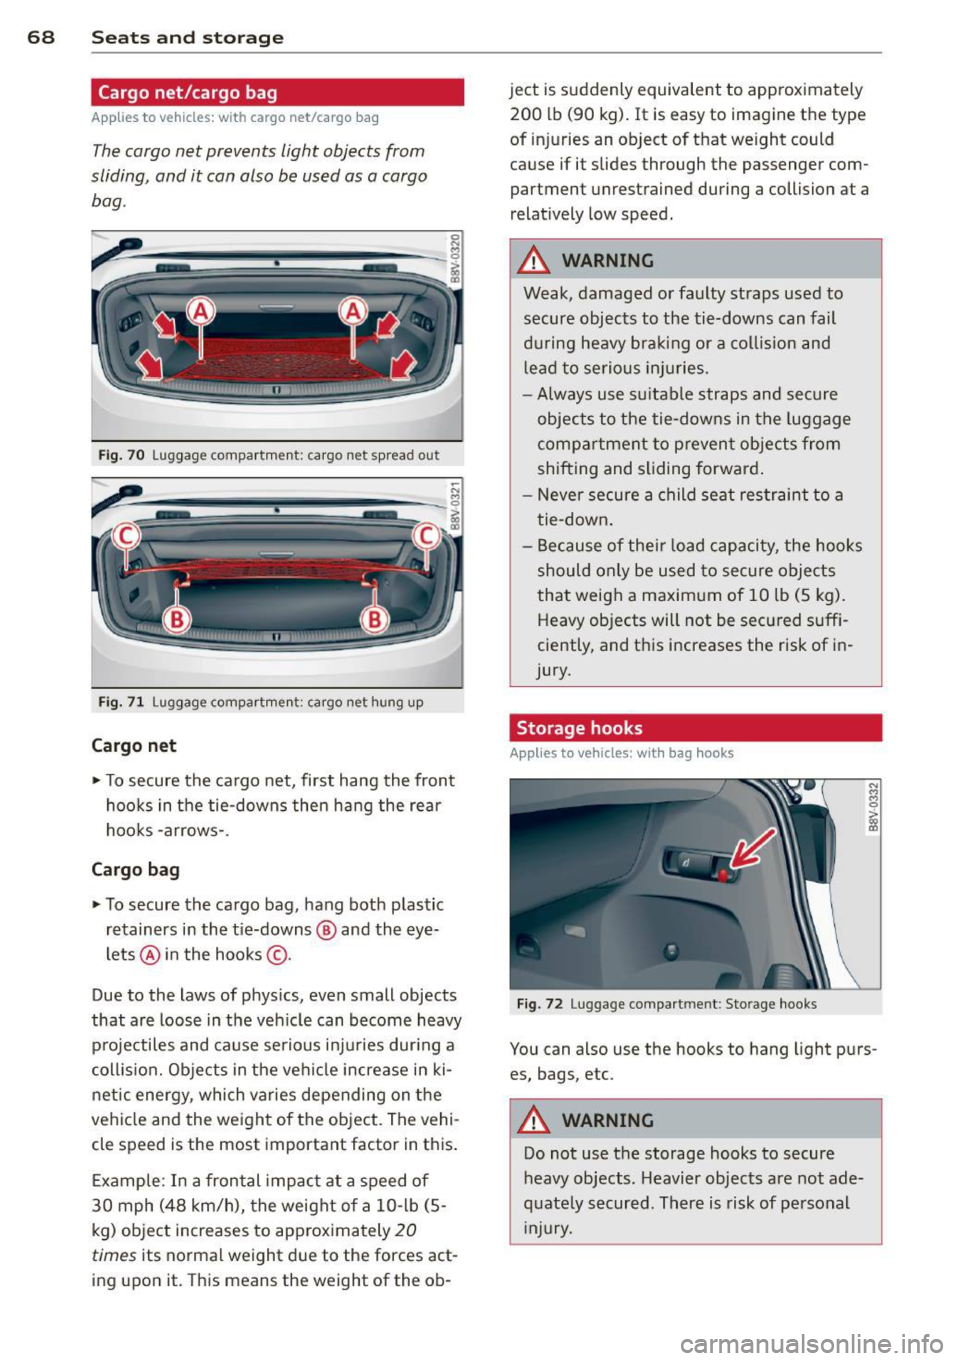 AUDI A3 CABRIOLET 2015  Owners Manual 68  Seats and  storage 
Cargo net/cargo  bag 
App lies  to vehicles: with  cargo net/cargo  bag 
The cargo  net  prevents  light  objects  from 
sliding,  and  it  can also  be used as a cargo  bag . 